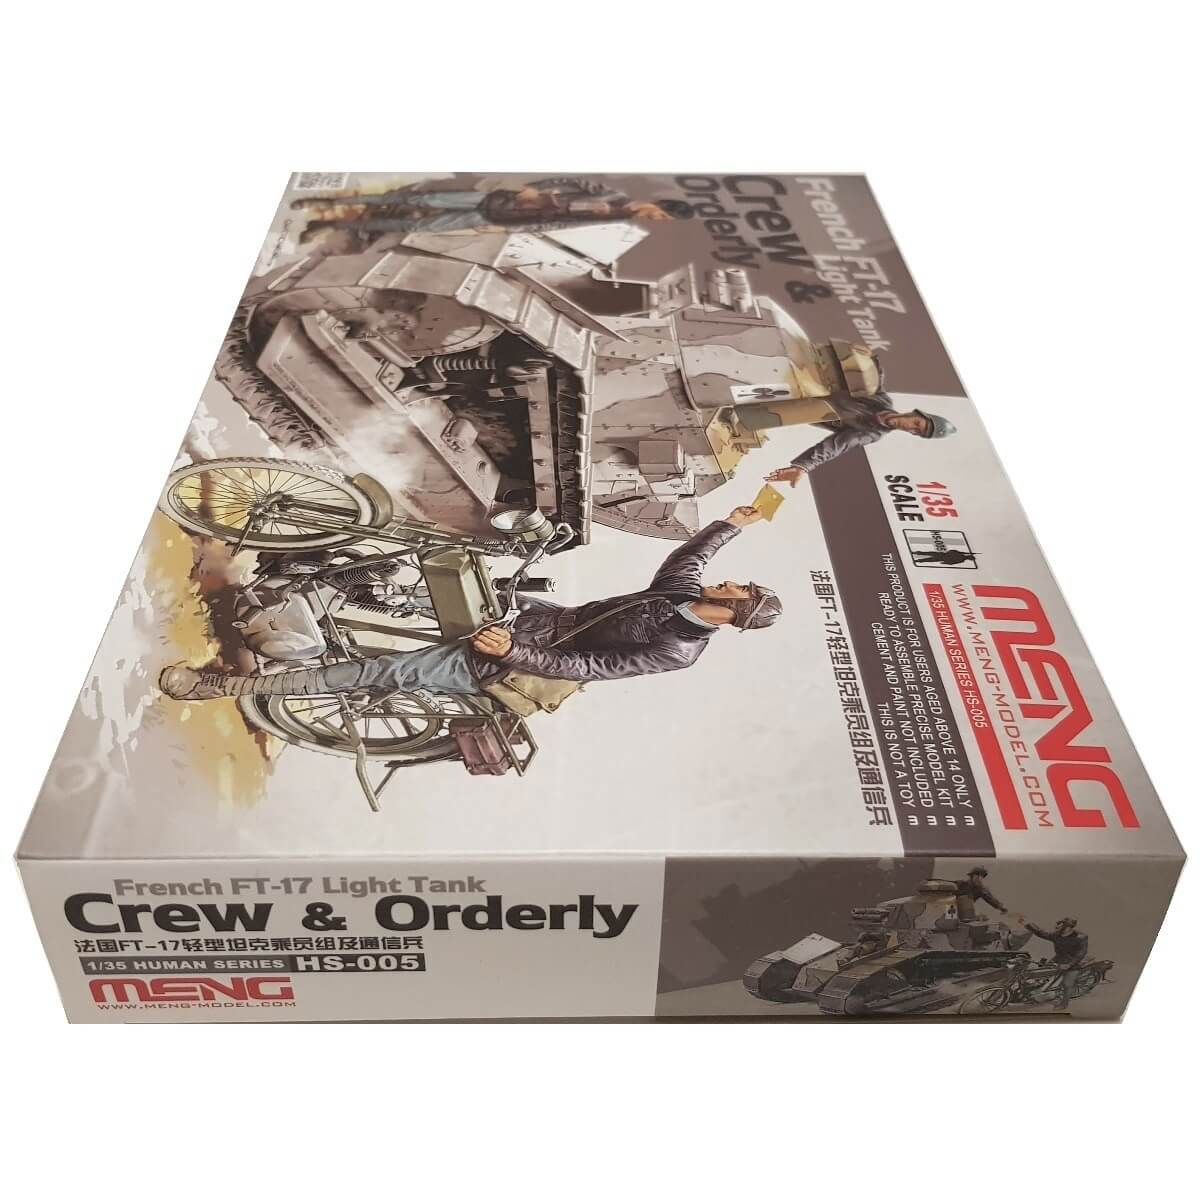 1:35 French FT-17 Light Tank - Crew and Orderly - MENG